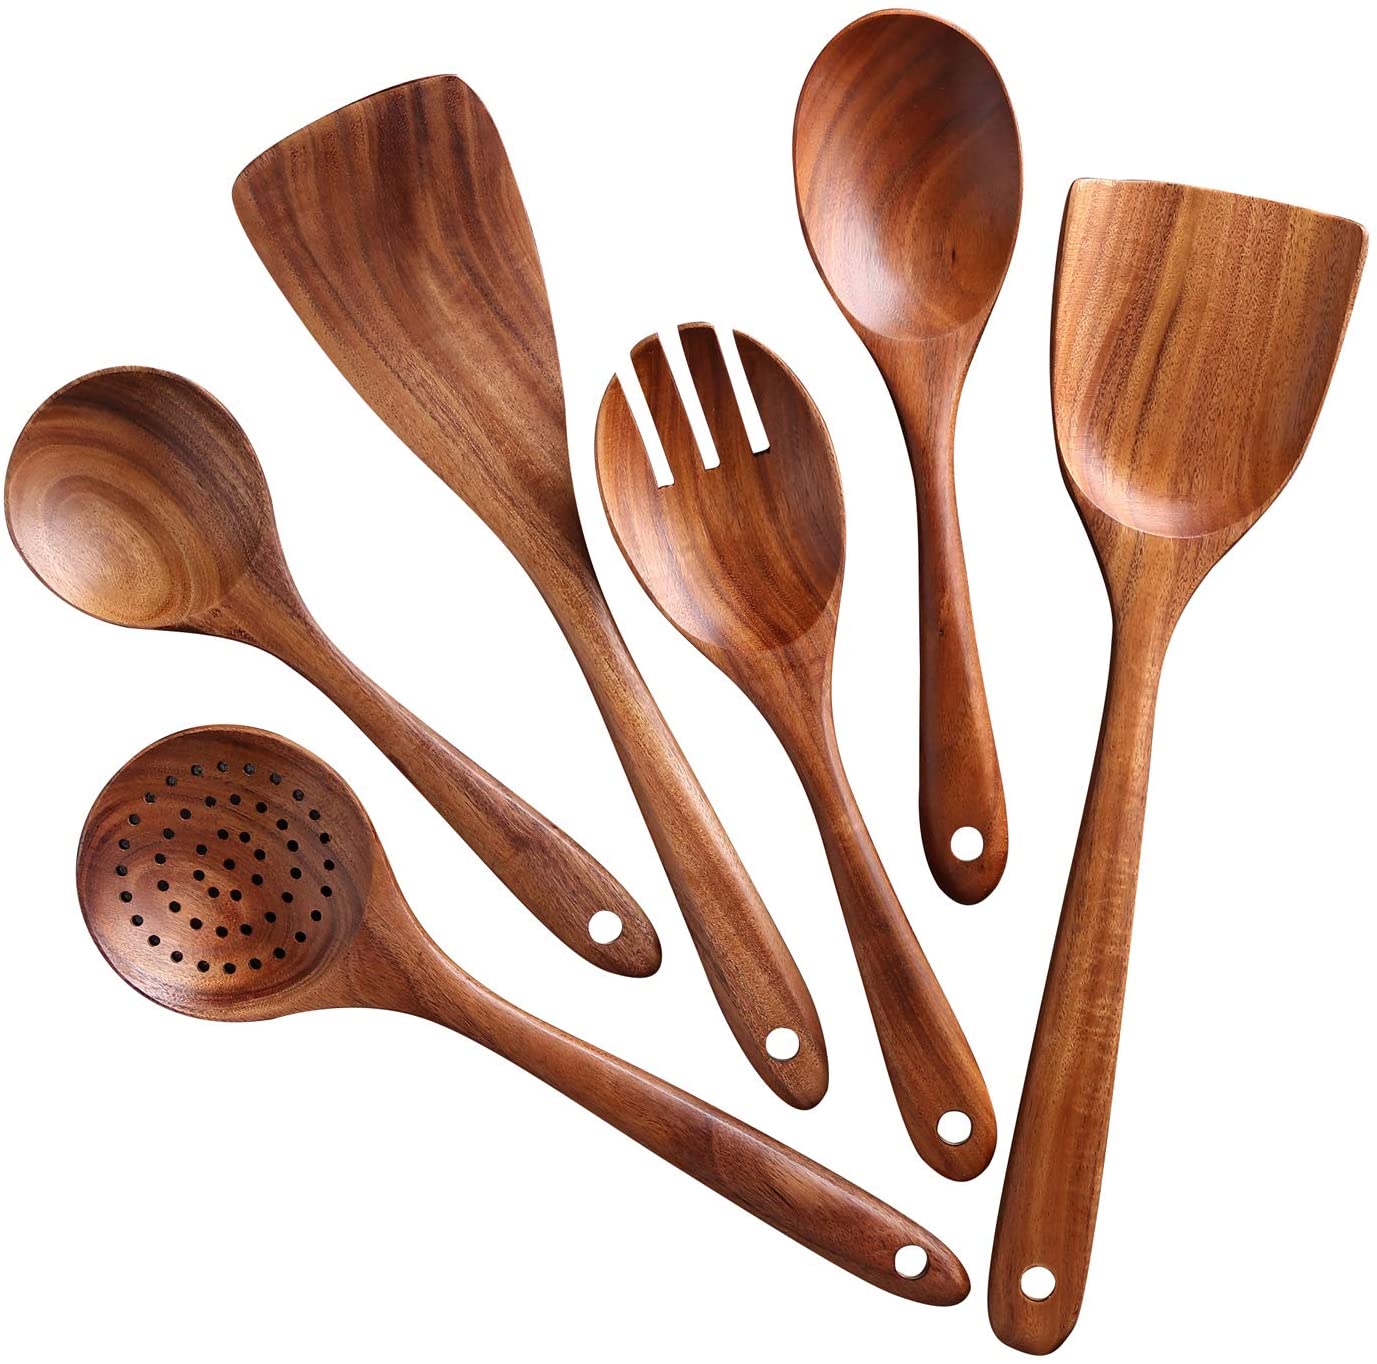 Wooden Utensils For Cooking,11 Pcs Wooden Spoons For Cooking, Teak Wooden  Utensils Set, Wood Kitchen Utensils For Nonstick Pan, Wood Spatula Spoon